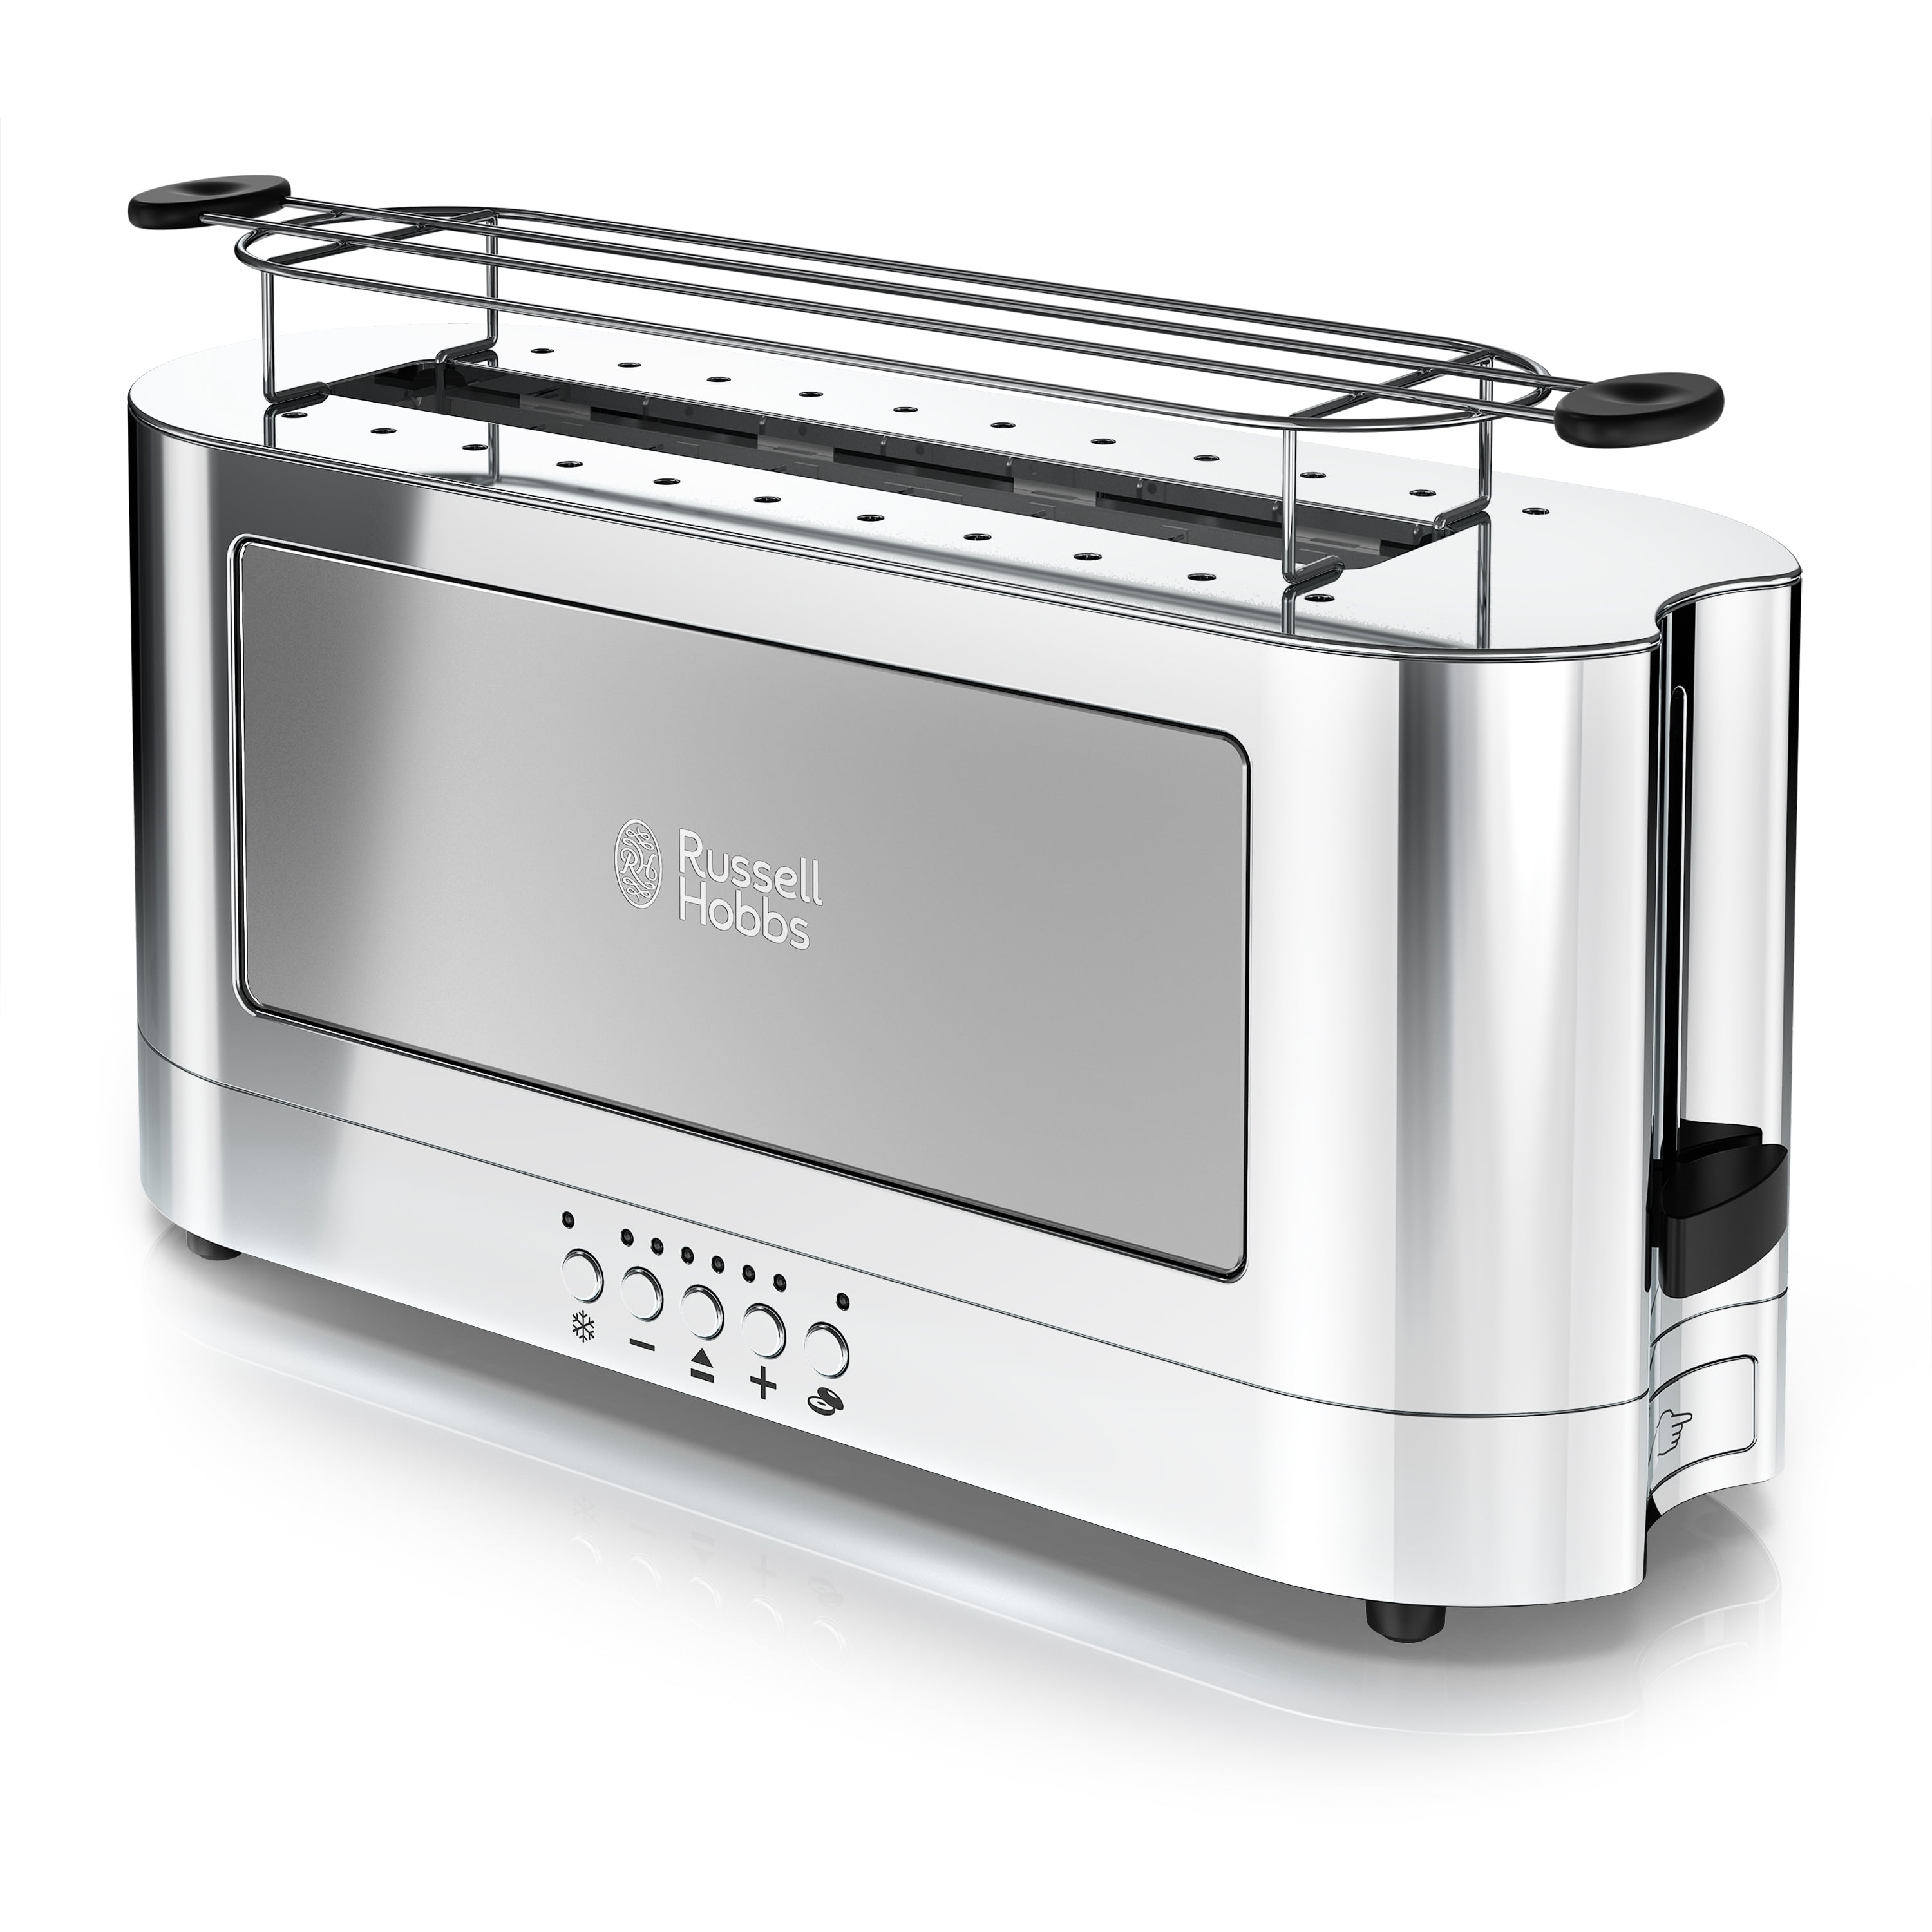 Russell Accent Hobbs Long TRL9300GYR Glass 2-Slice Toaster, Silver,